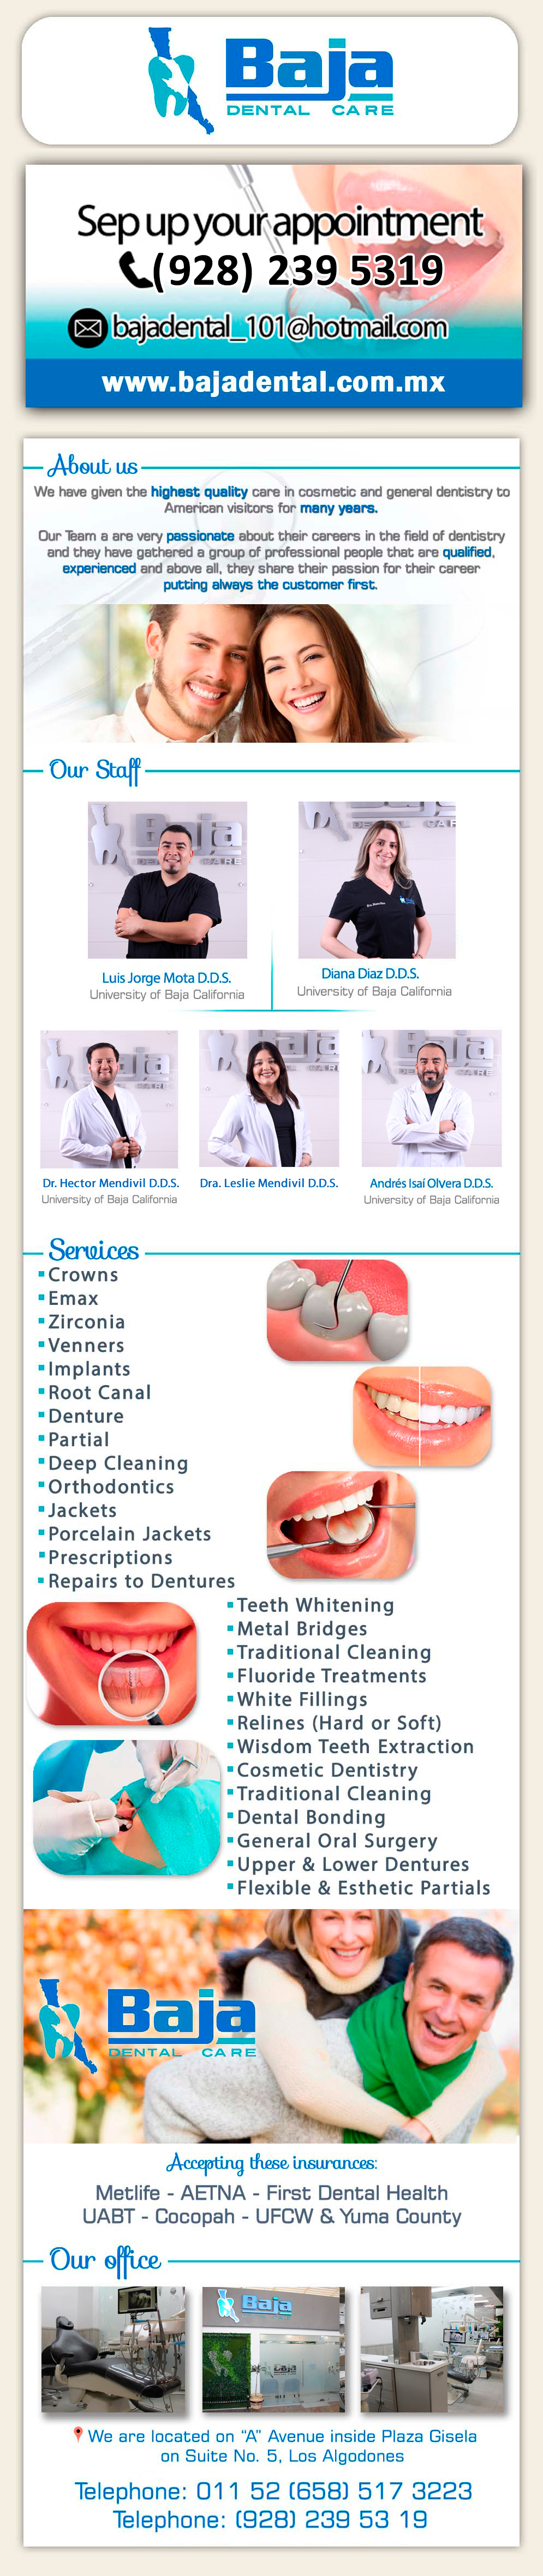 Baja Dental Care-Next you will find some of the services provided in Baja Dental. In all of them we only use High quality materials and we follow standards of sterilization according to norm:	Deep Cleaning 
Orthodontics 
Acrylic Dentures 
Jackets 
Porcelain Jackets 
Prescriptions 
Repairs to Dentures 
Teeth Whitening 
Metal Bridges
Traditional Cleaning
Porcelain Veneers
Fluoride Treatments Implants
White Fillings
Relines (Hard or Soft)
Root Canals
Wisdom Teeth Extraction
Cosmetic Dentistry
Traditional Cleaning
Dental Bonding
General Oral Surgery
Upper & Lower Dentures
Flexible & Esthetic Partials
Porcelain Veneers     	         